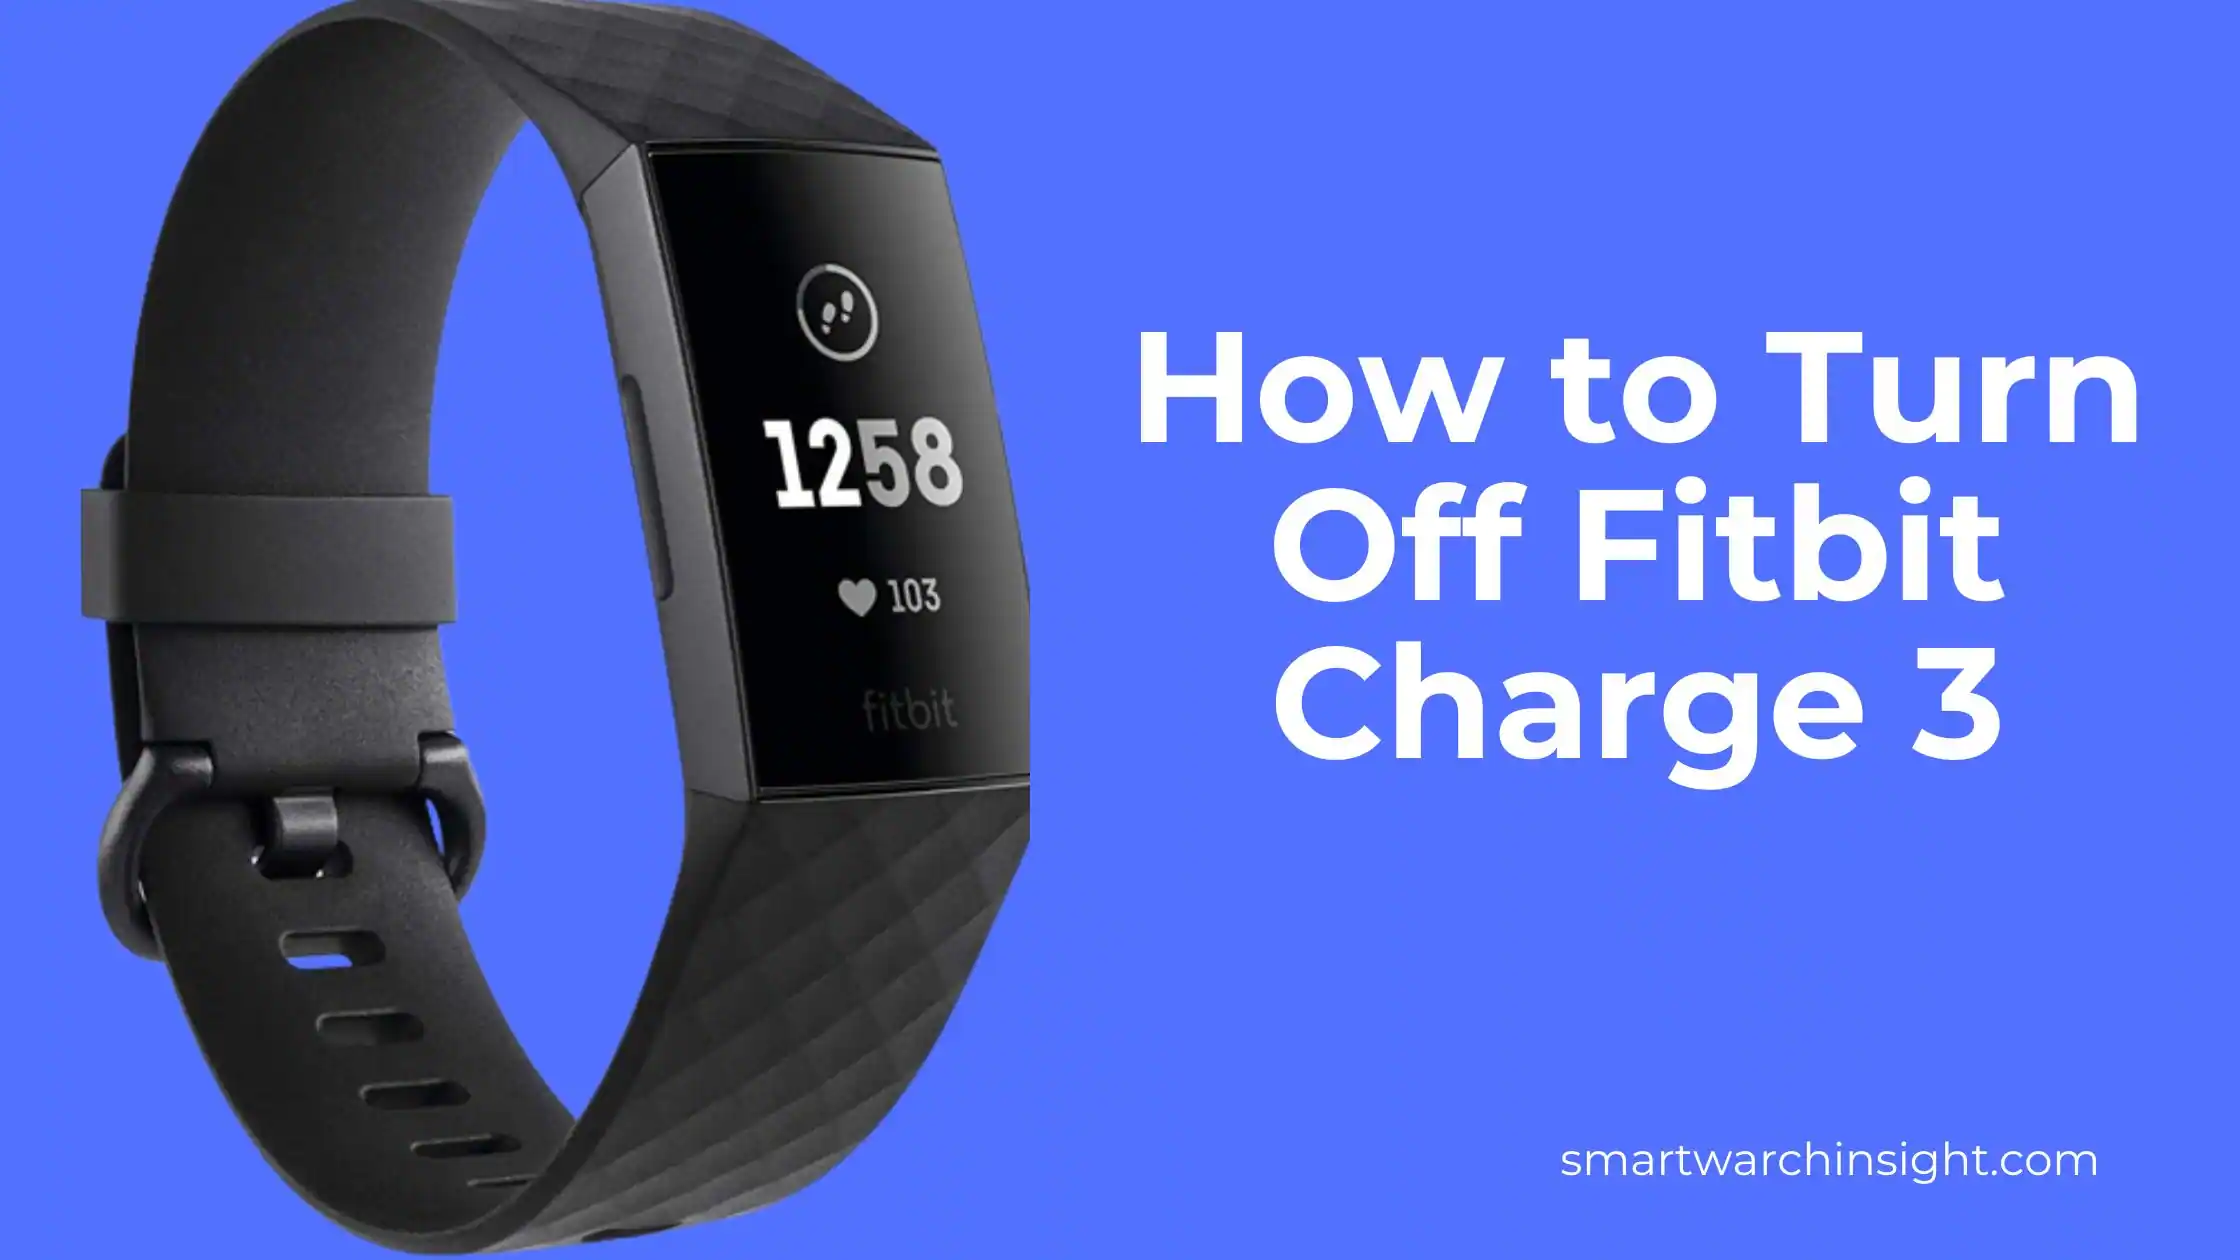 How to Turn Off Fitbit Charge 3